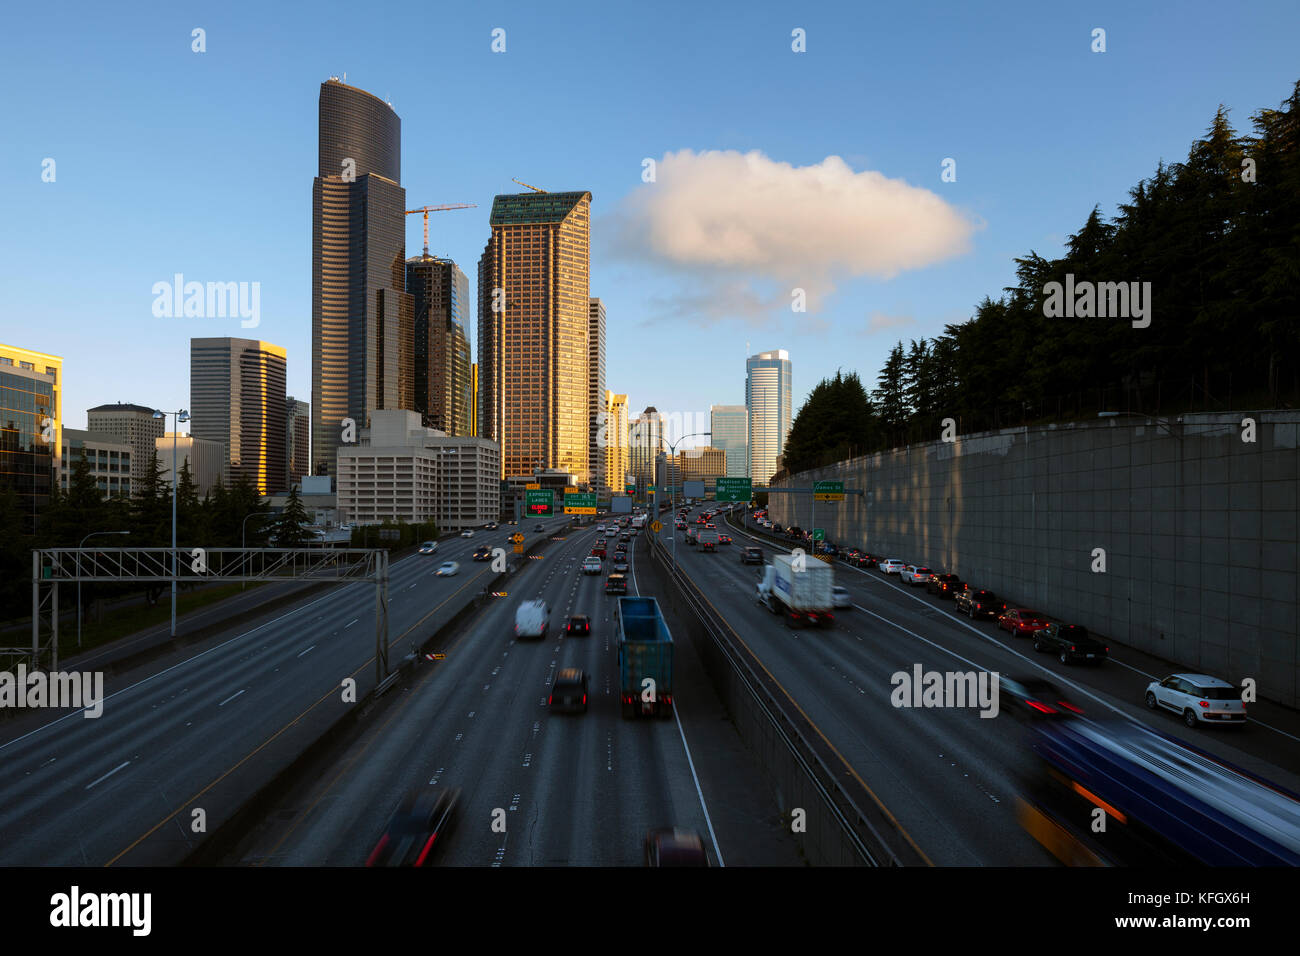 WA14068-00...WASHINGTON - Interstate 5 and the Seattle skyline viewed from the Yesler Way overpass at sunrise. Stock Photo